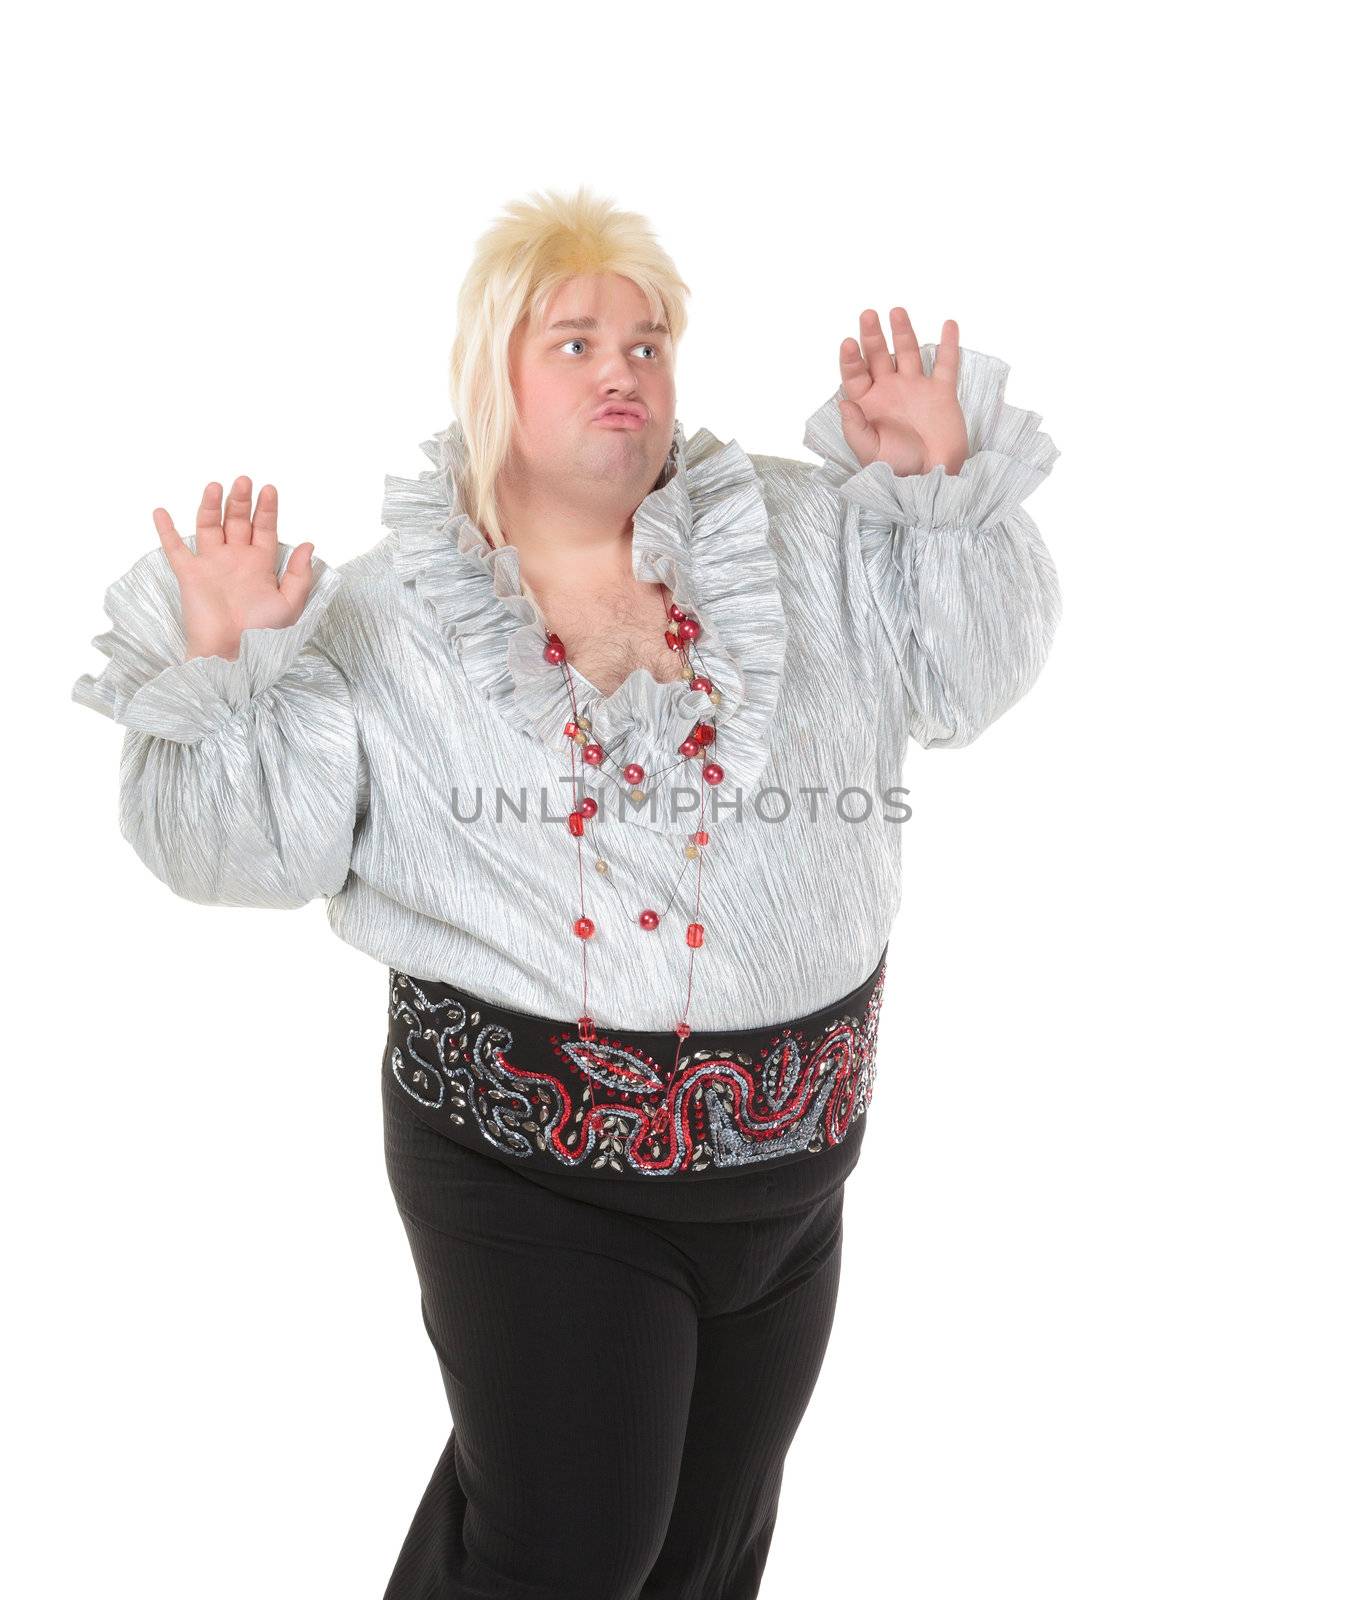 Crazy funny fat man posing wearing a blonde wig and traditional clothes, on white